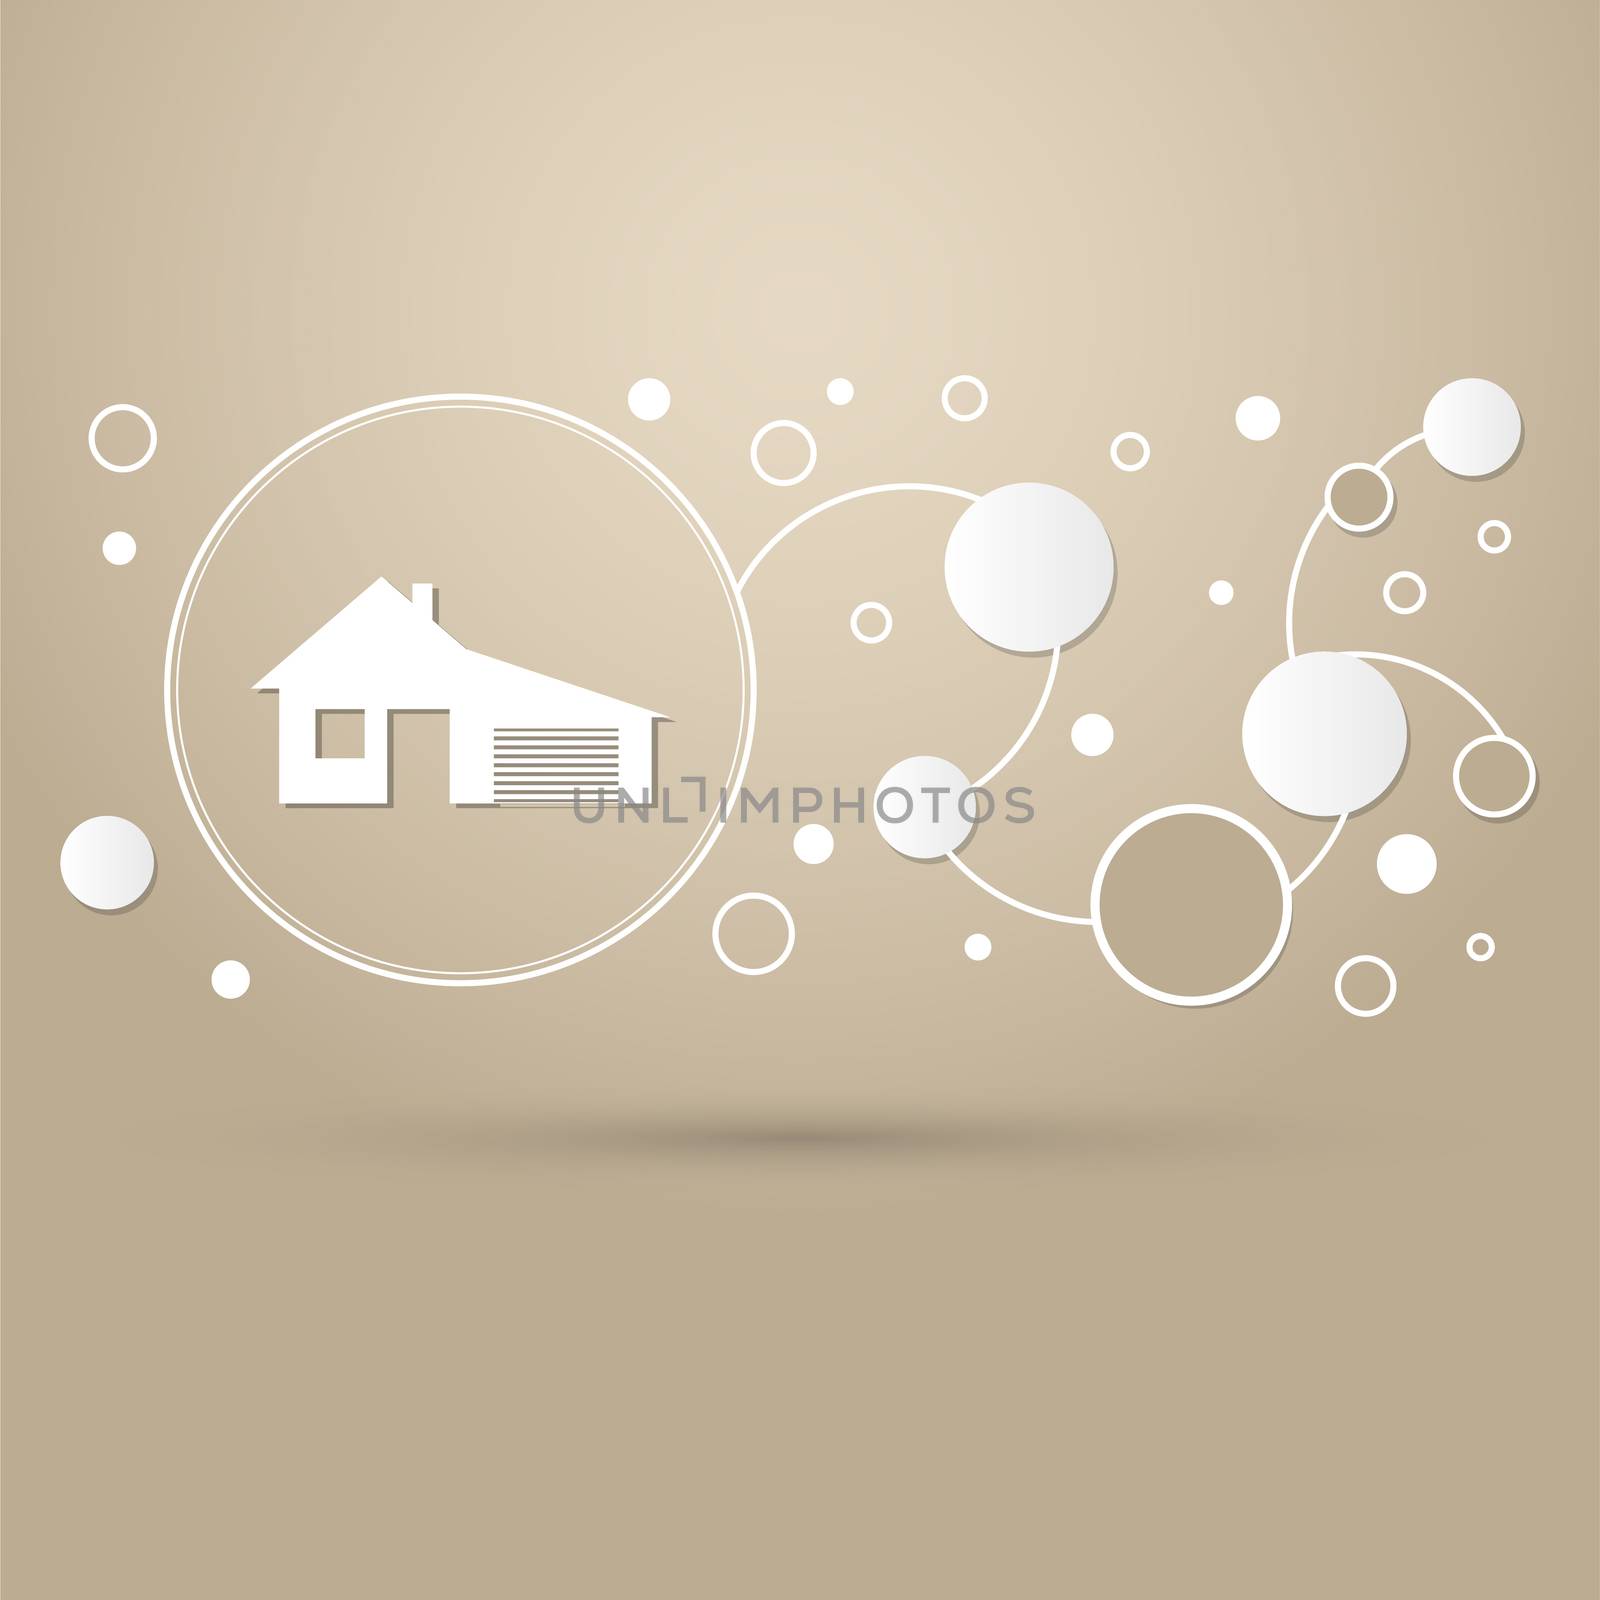 house with garage icon on a brown background with elegant style and modern design infographic. illustration